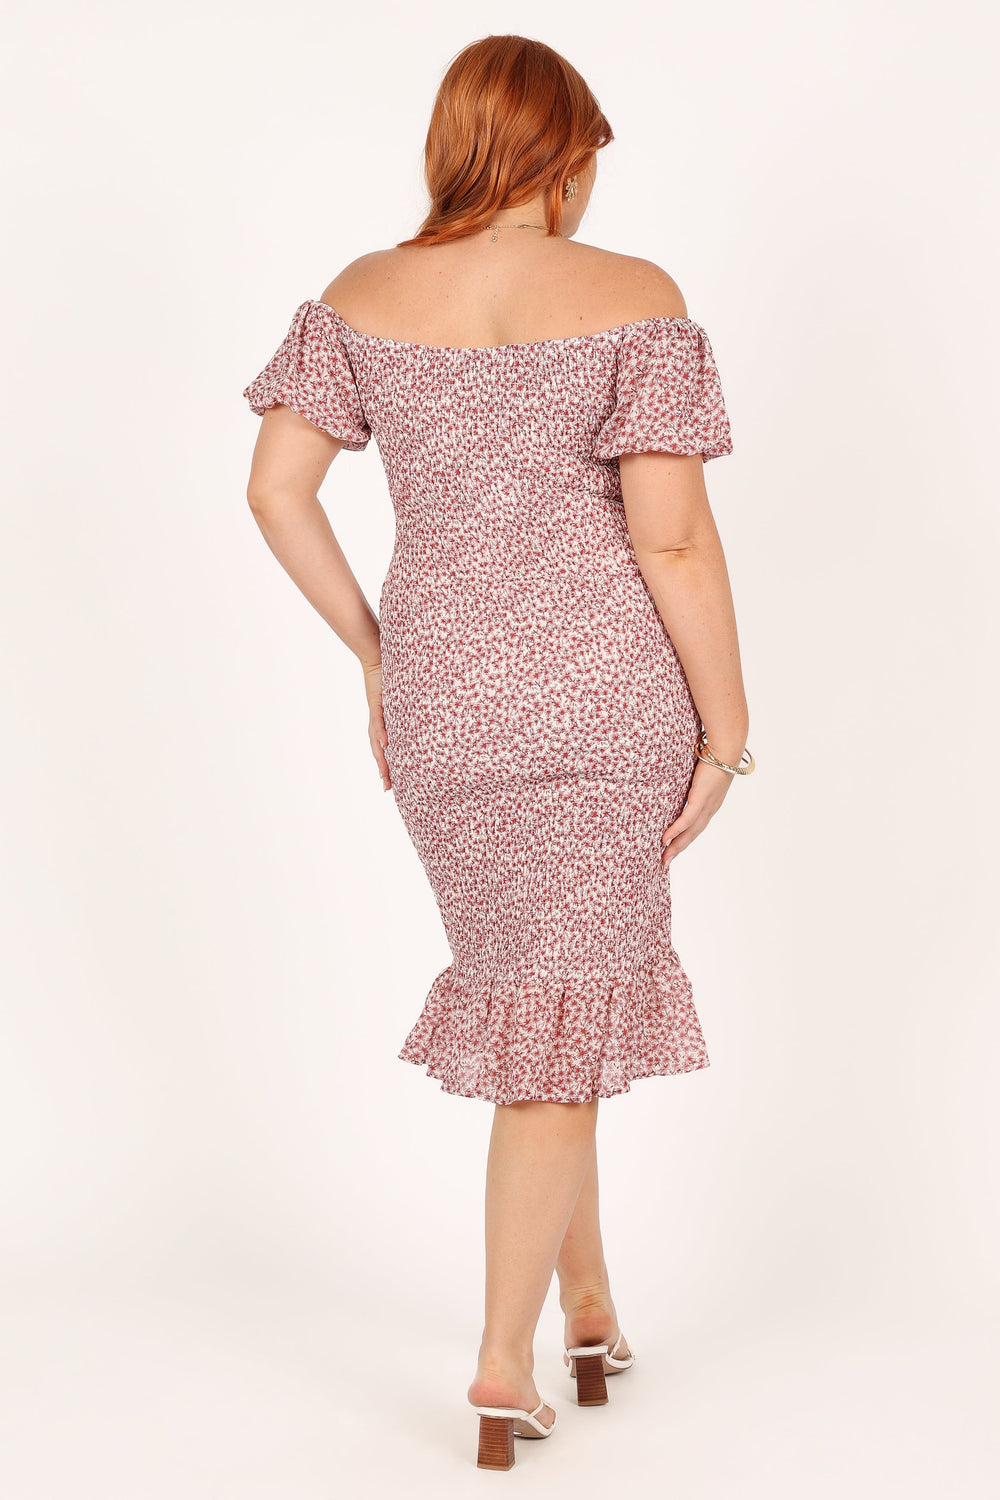 DRESSES Claire Shirred Bodycon Off Shoulder Midi Dress - Pink Floral